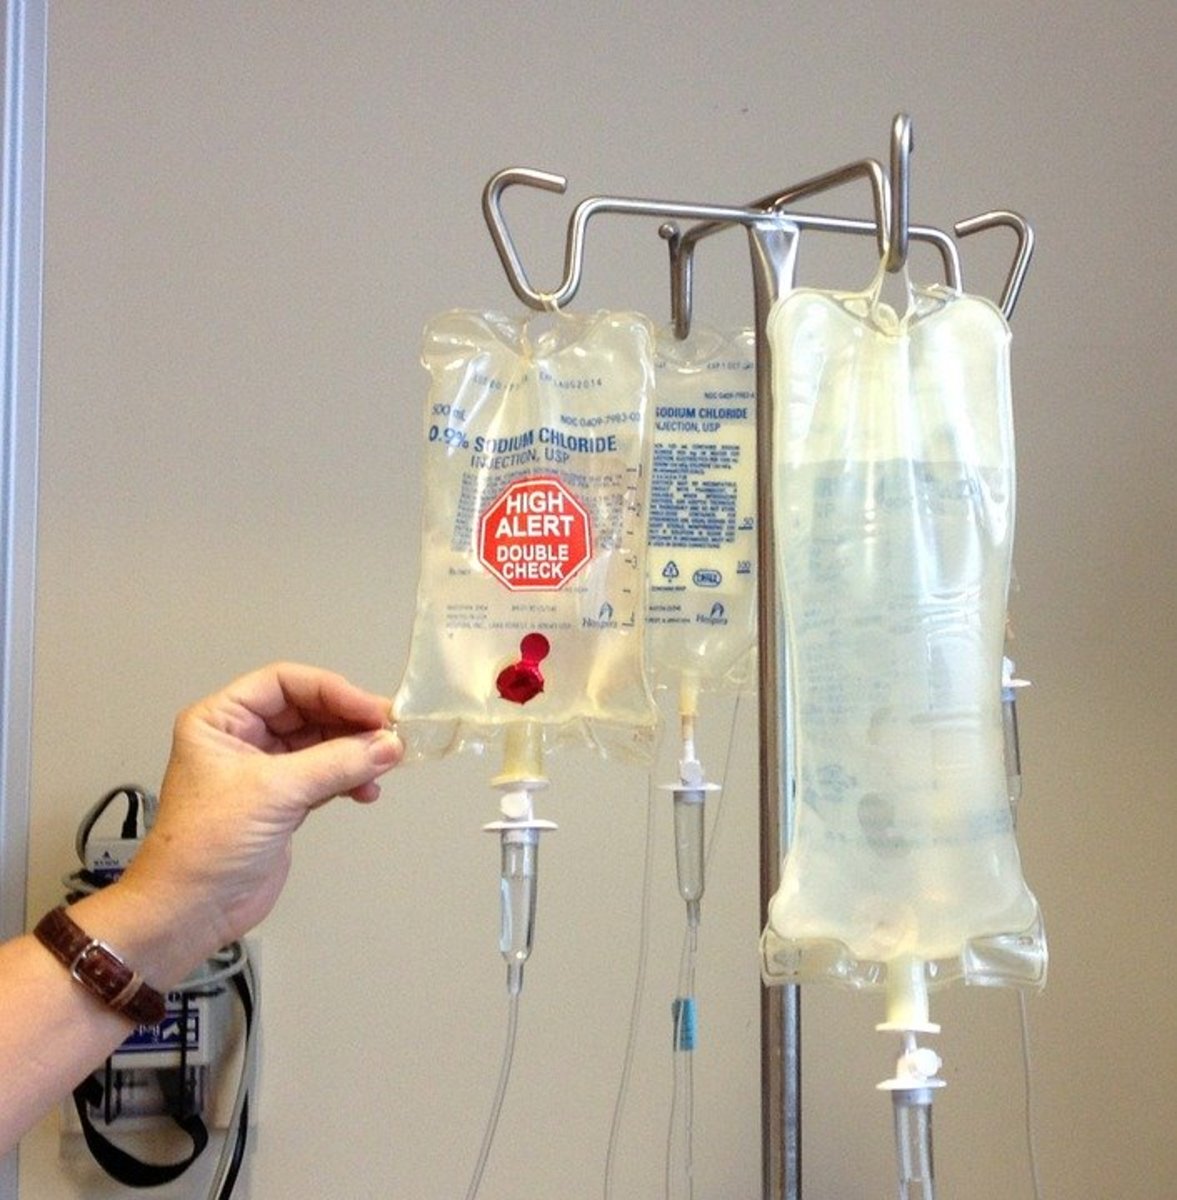 Here is what the IV bags look like for chemo. 